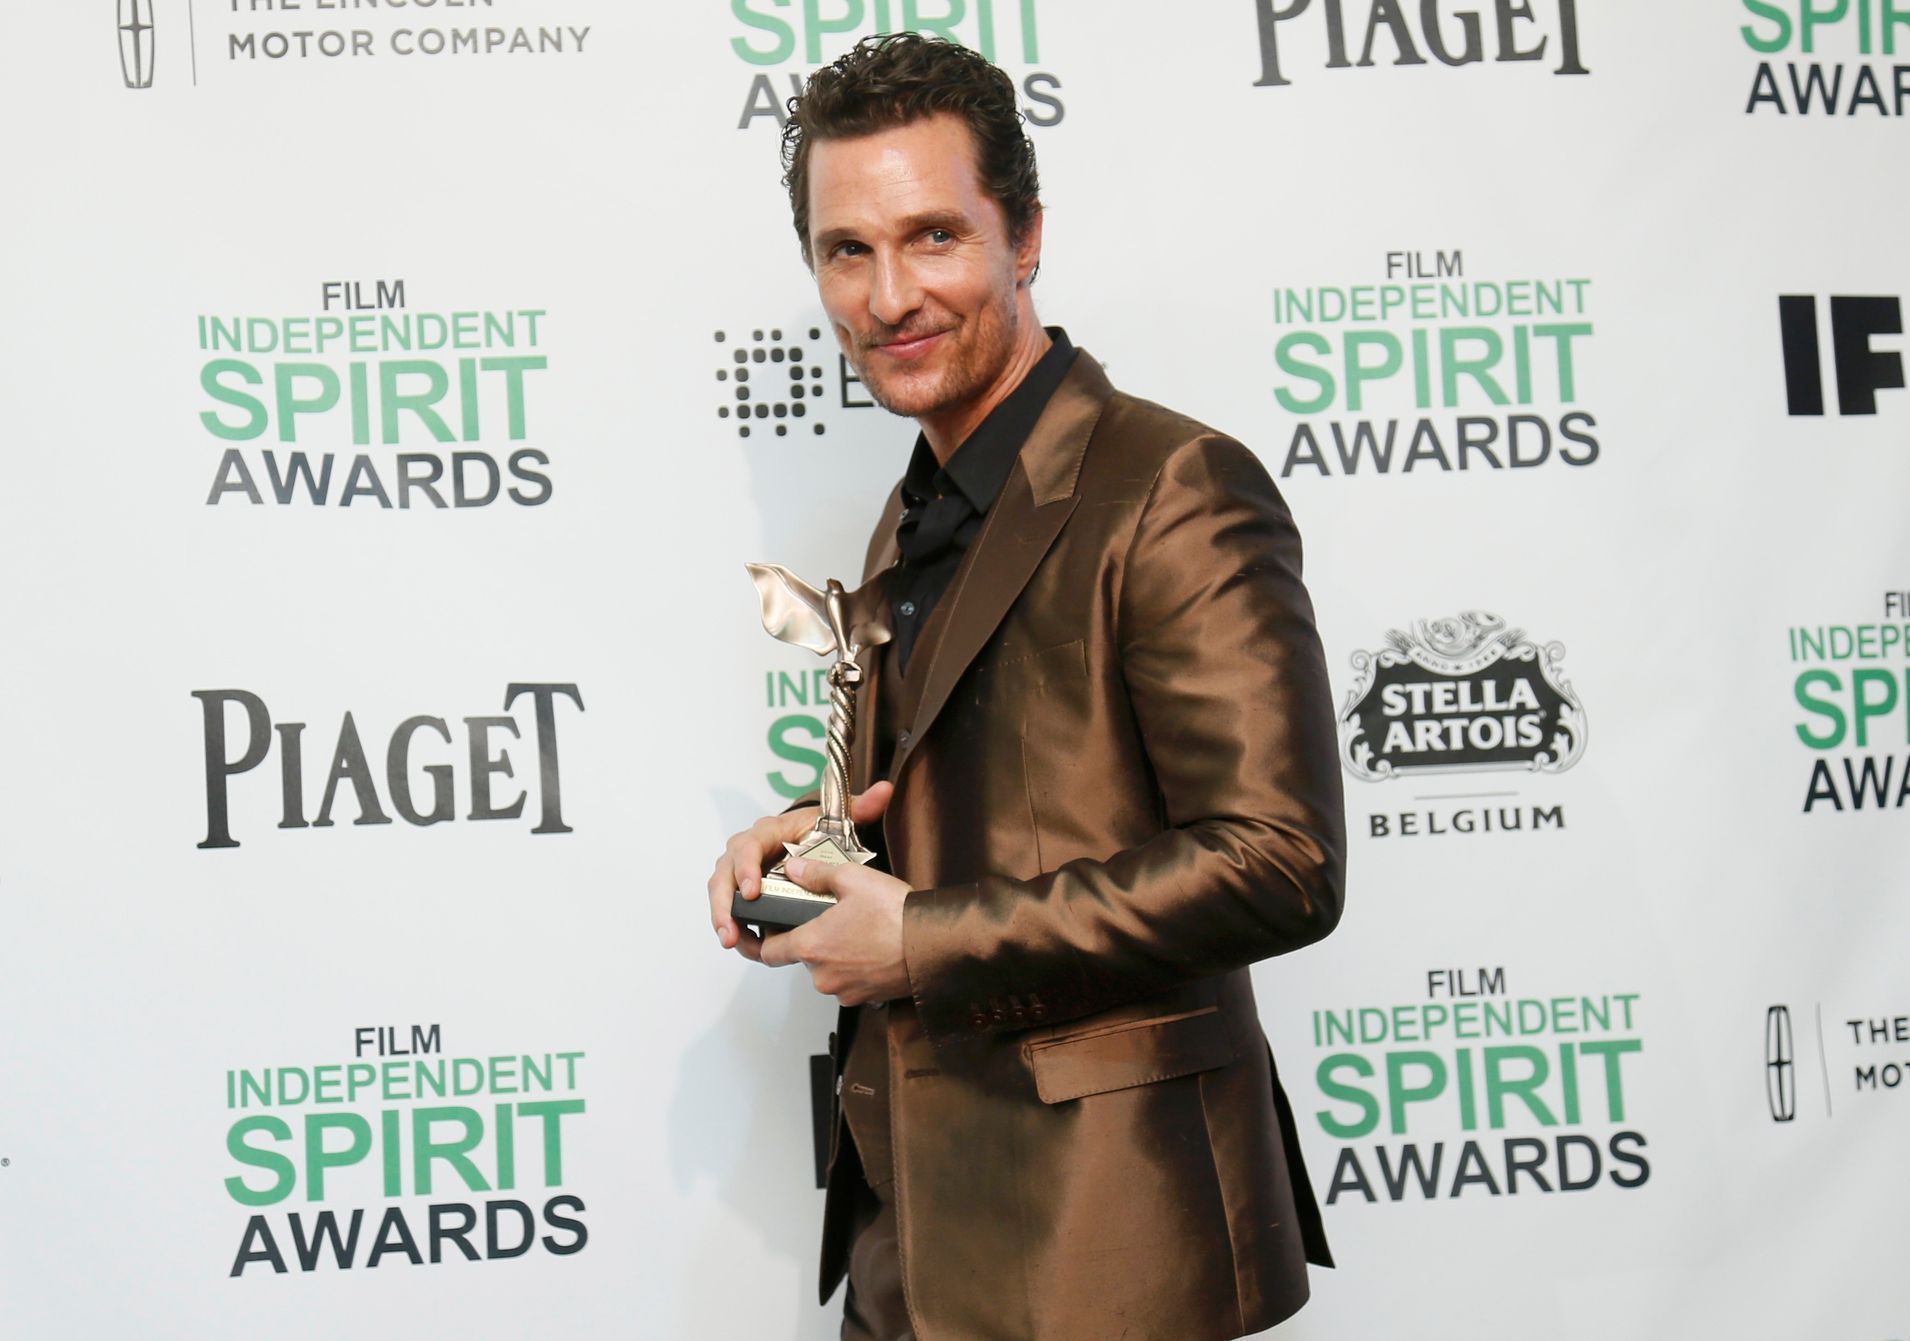 Actor Matthew McConaughey poses backstage after winning the Best Male Lead award for &quot;Dallas Buyers Club&quot; at the 2014 Film Independent Spirit Awards in Santa Monica